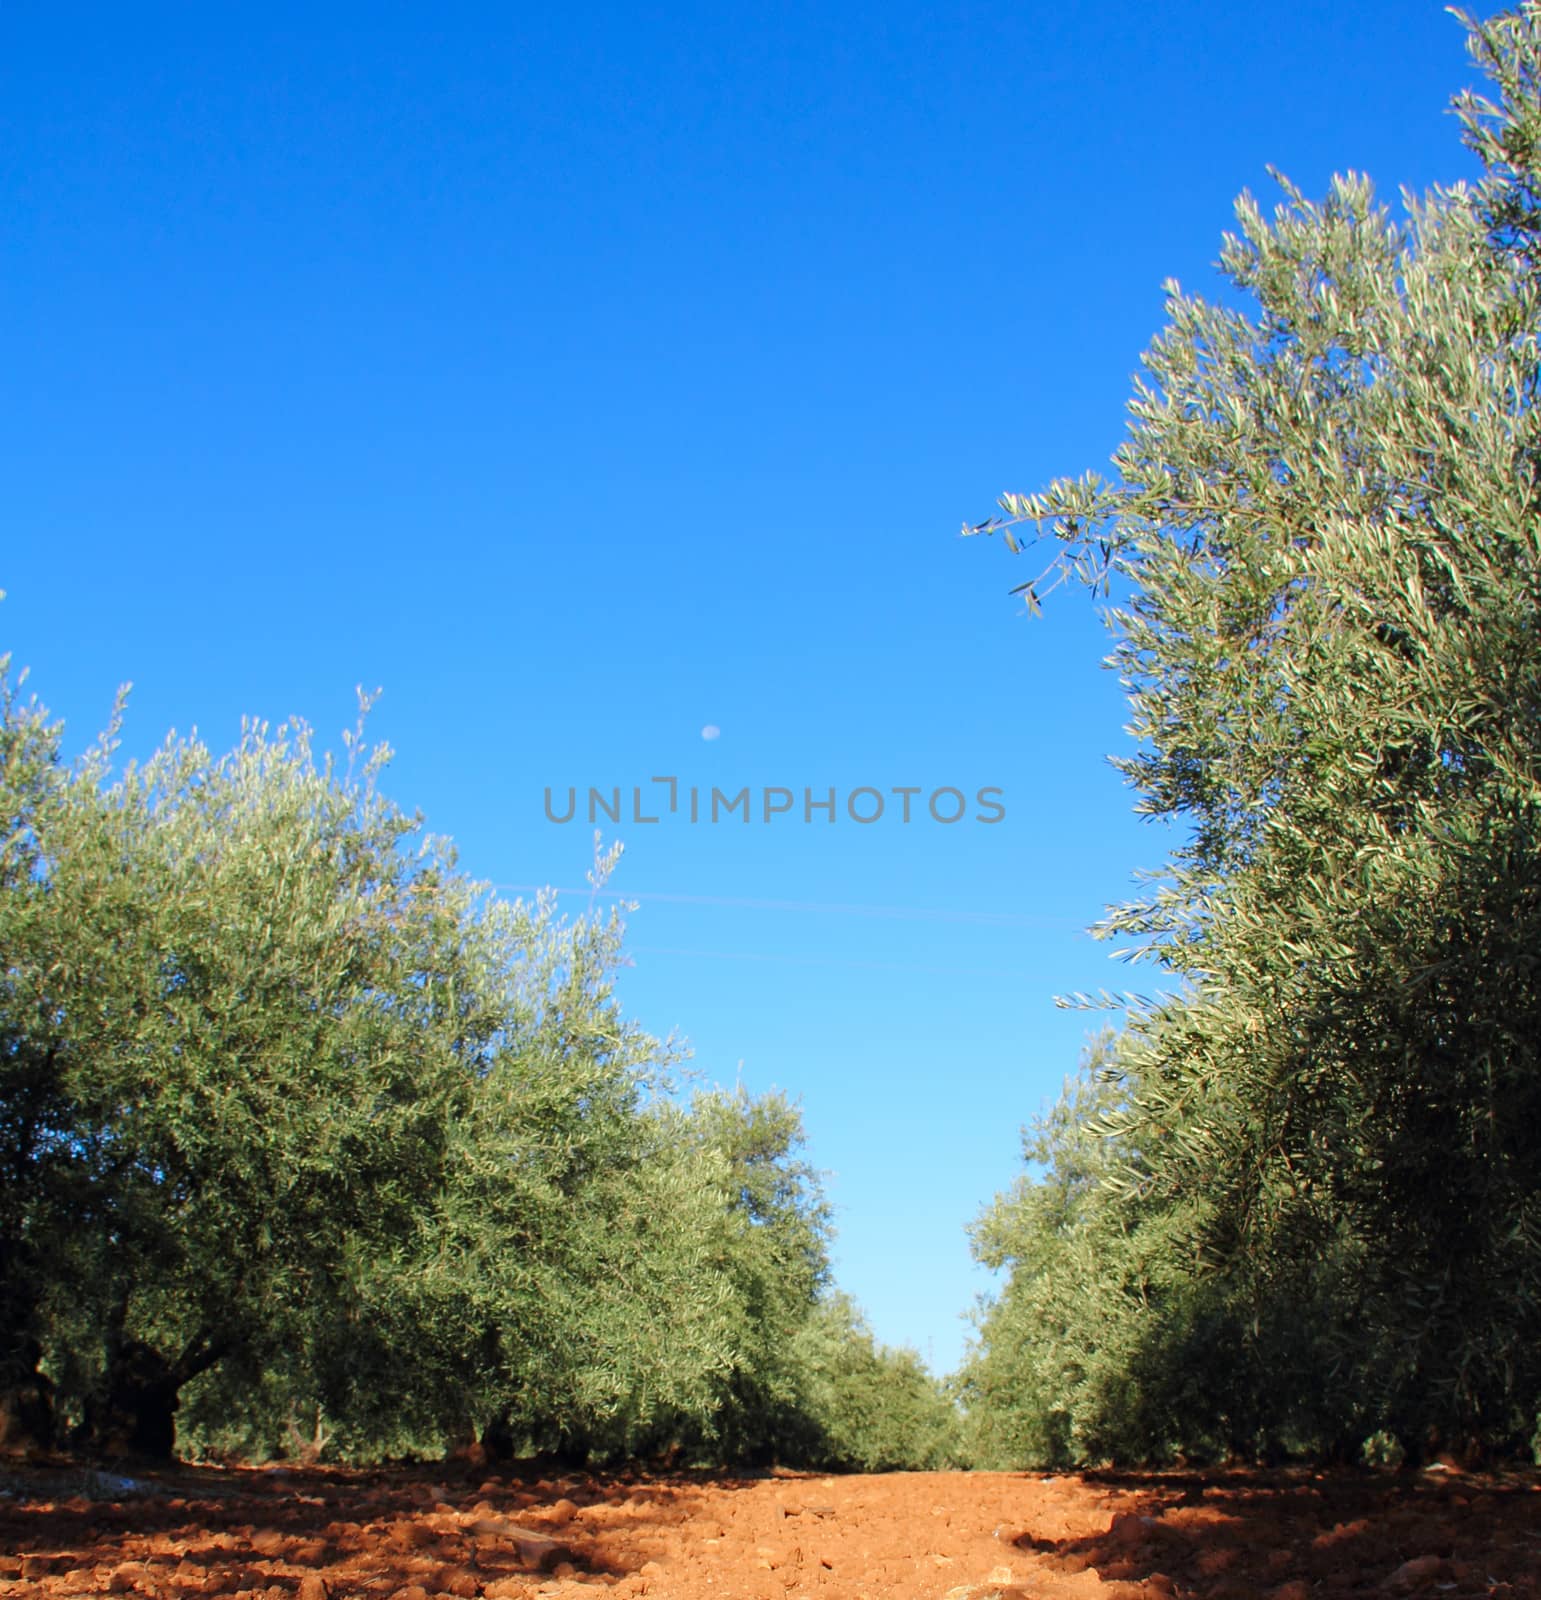 Beautiful olive trees in garden with red soil